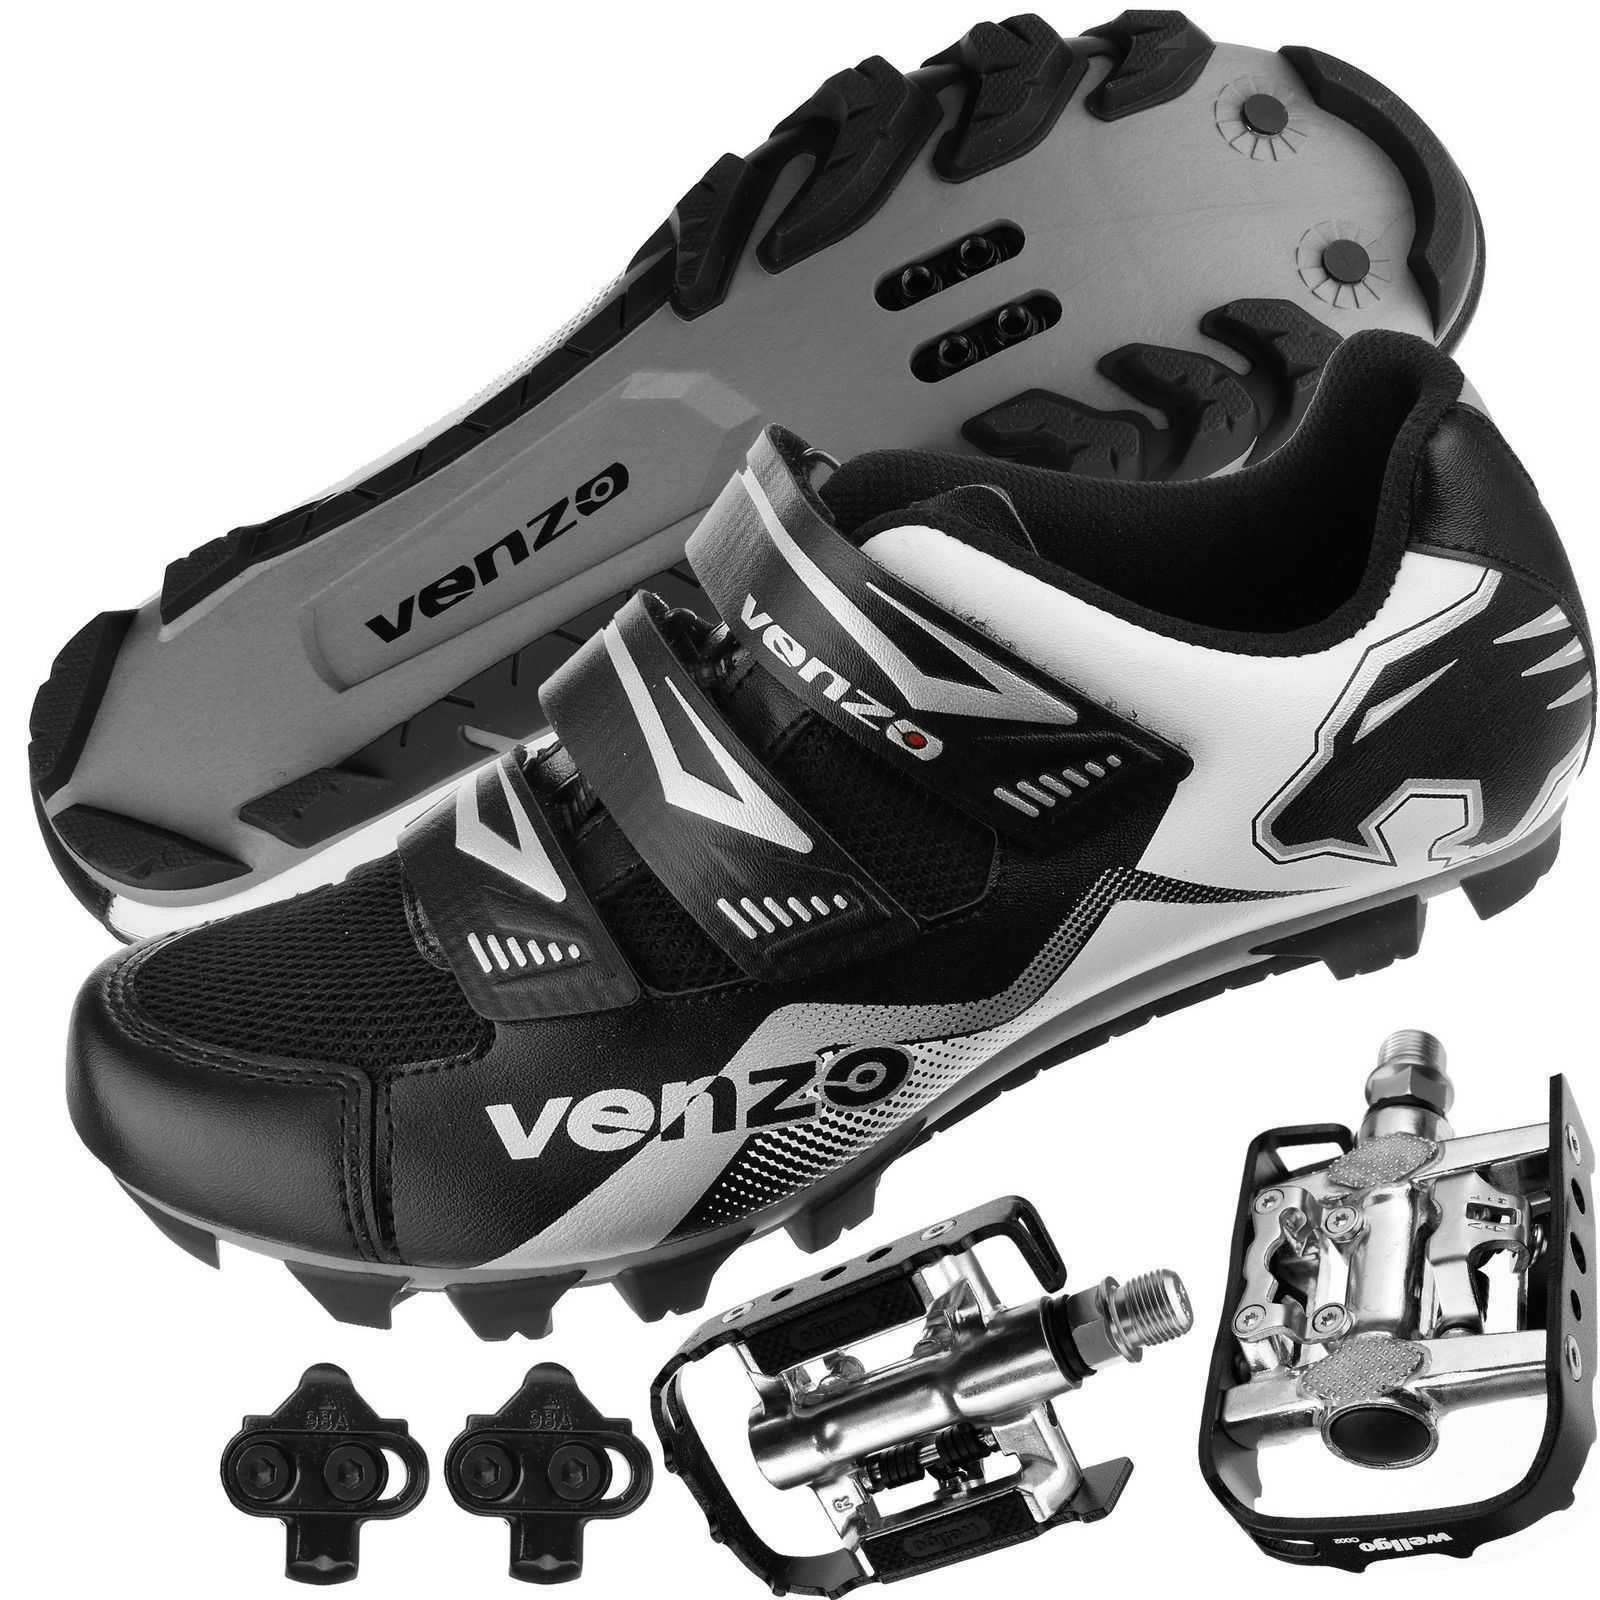 Venzo Mountain Bike Bicycle Cycling Shimano SPD Shoes Multi-Use Pedals 